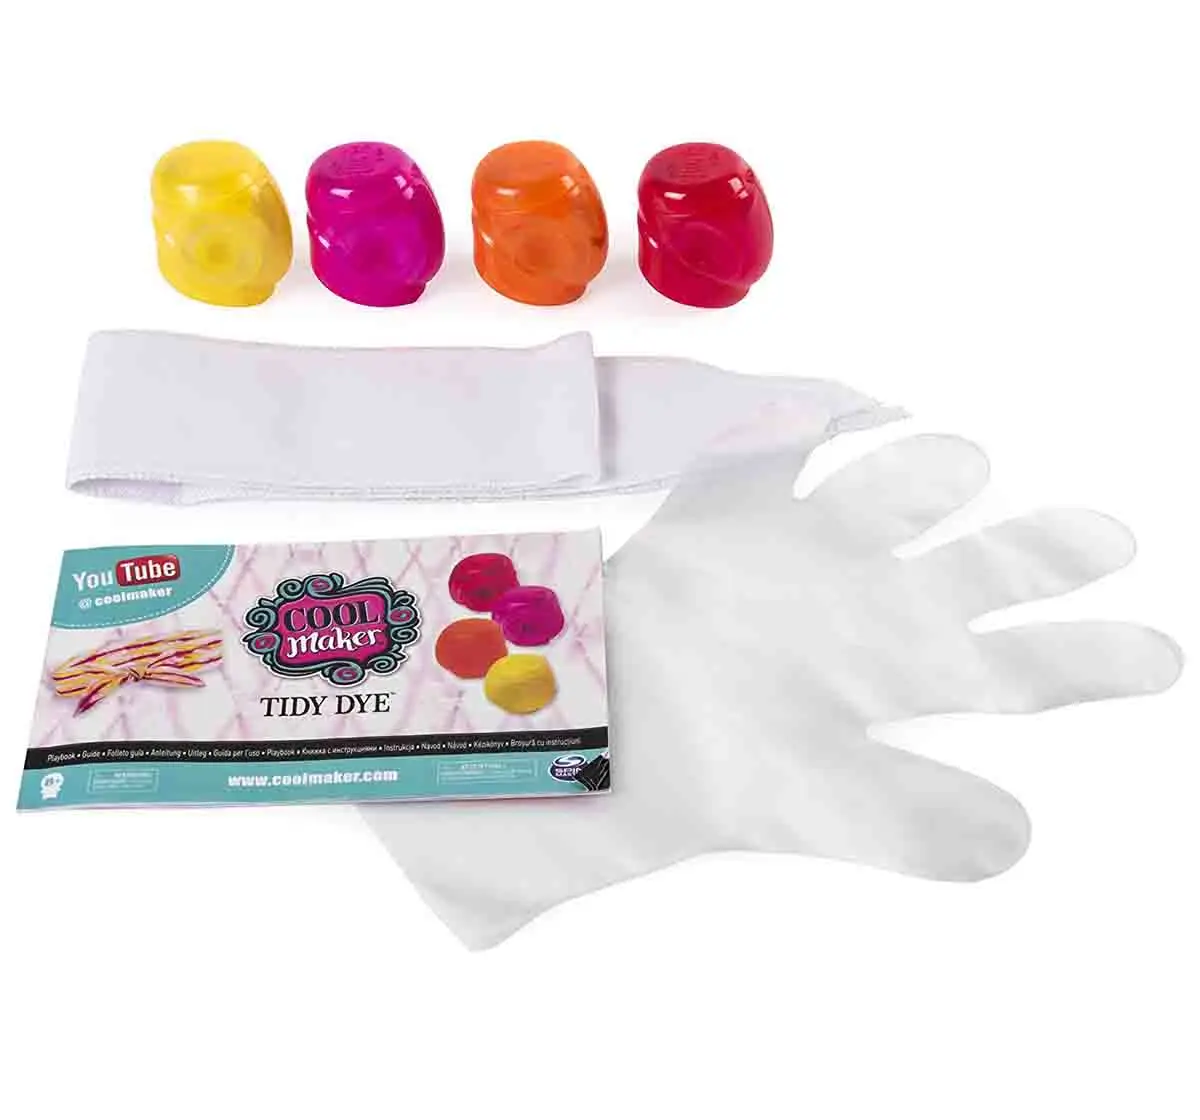 Tidy Dye Cool Maker Tidy Dye Sunny String Kit For Fabric Dying